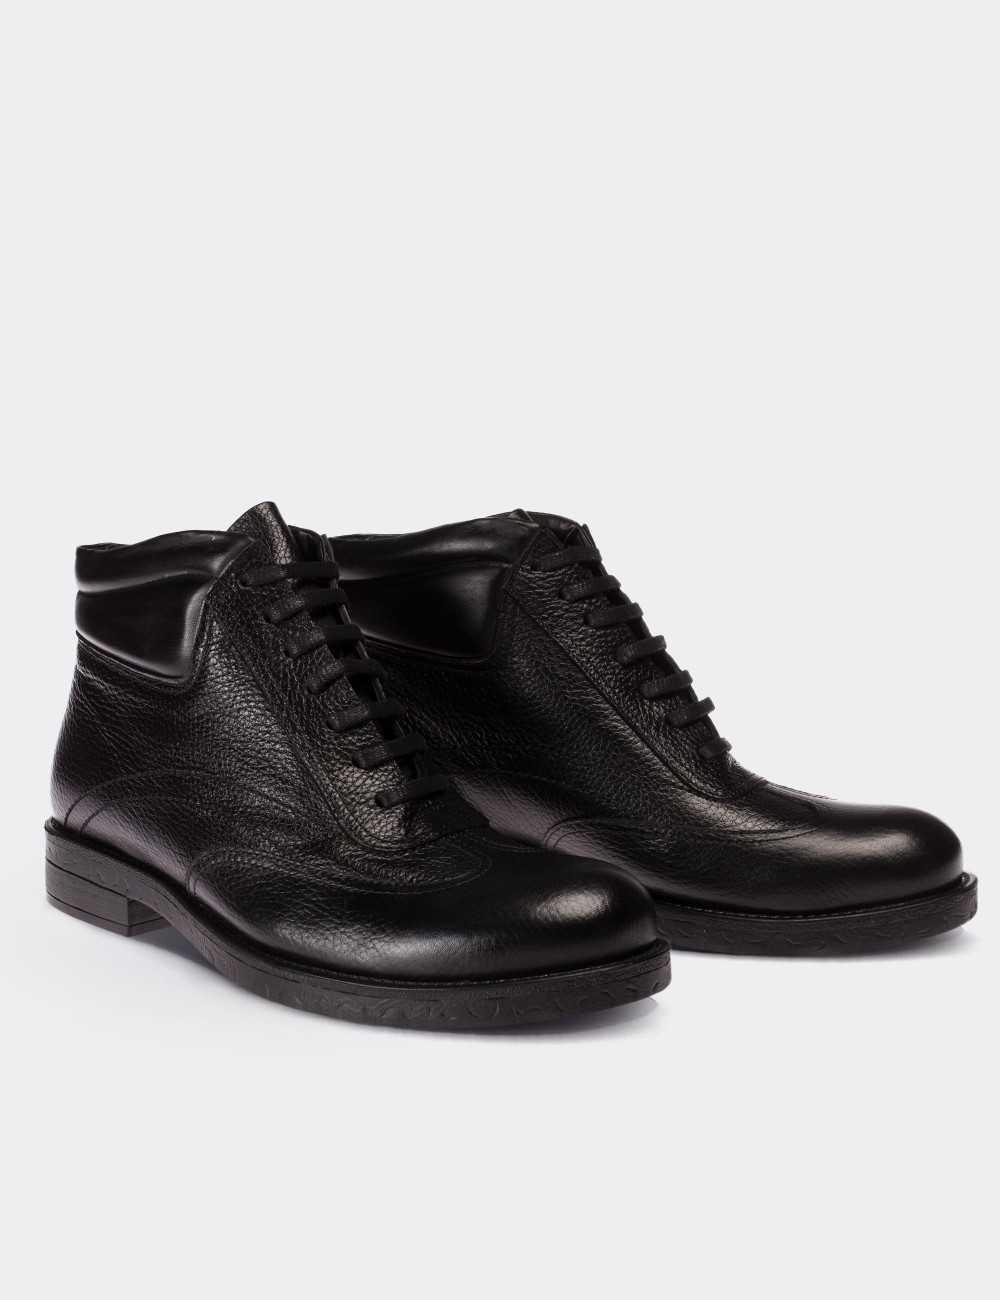 Black  Leather  Boots - 01759MSYHC01